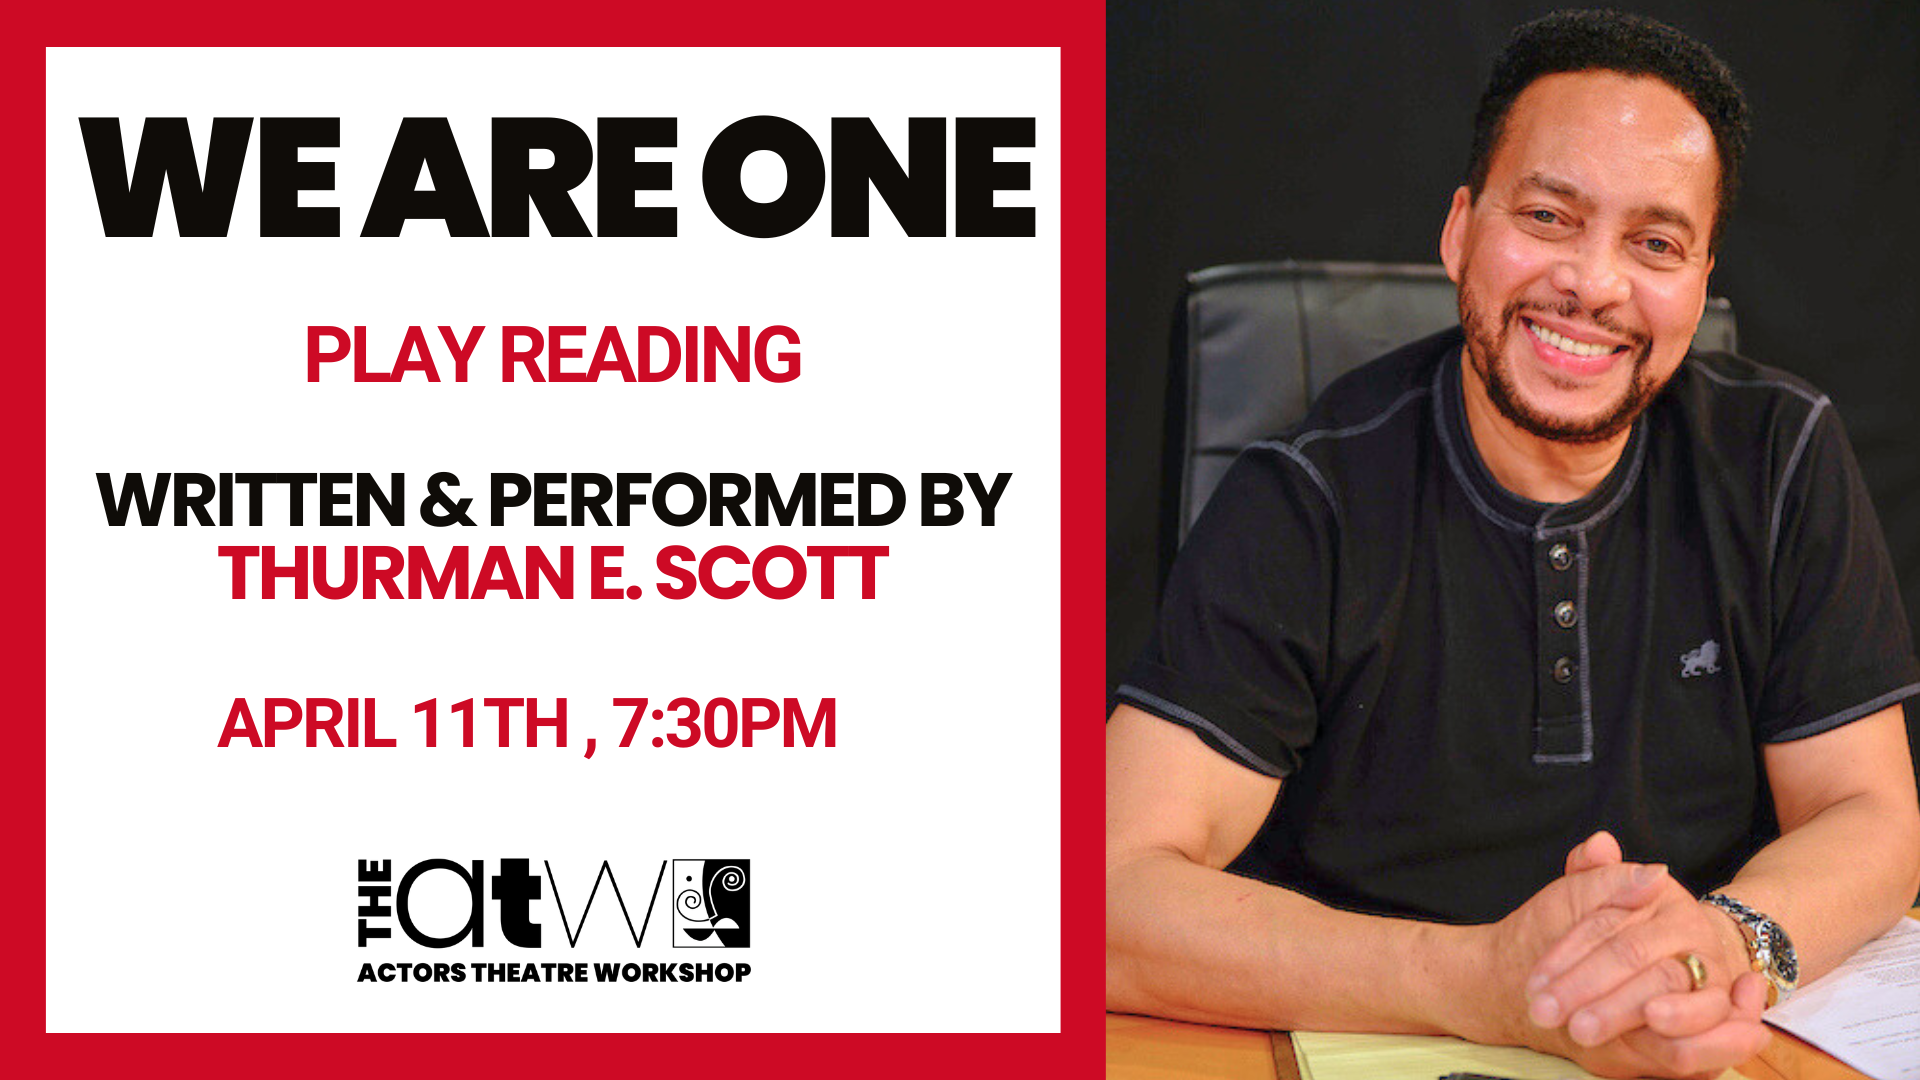 We Are One Play Reading Performed by Thurman E. Scott April 11th